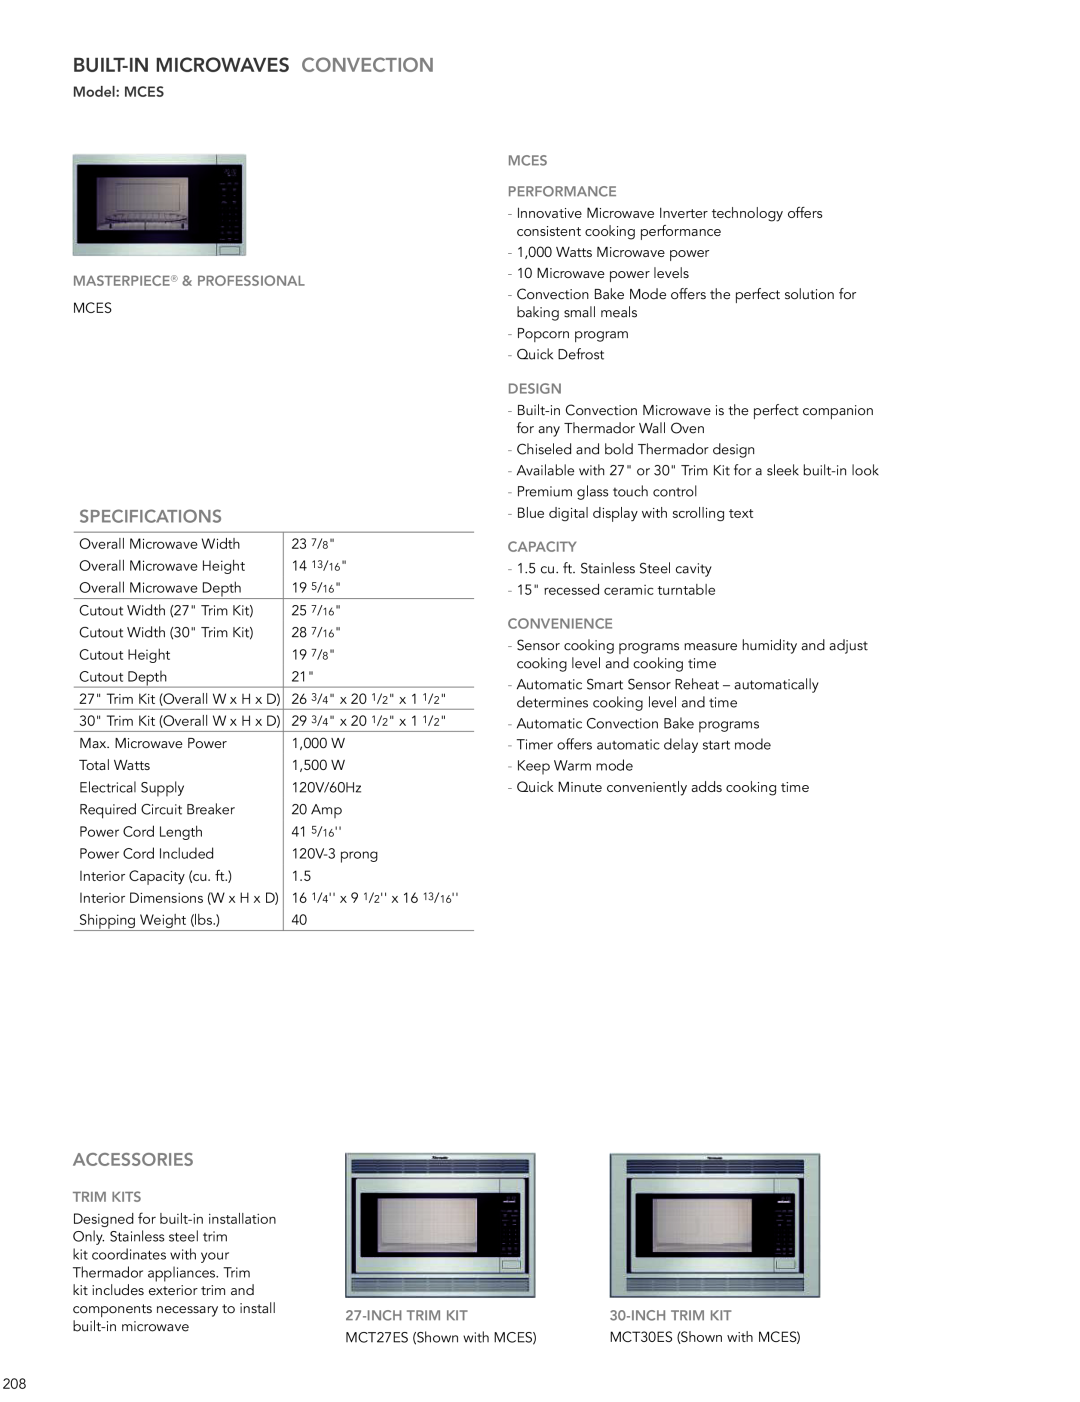 Thermador 200 Built-In Microwaves Convection, Model MCES, Mces Performance, INCh TRIM KIT, MCT27ES Shown with MCES, DESIgN 